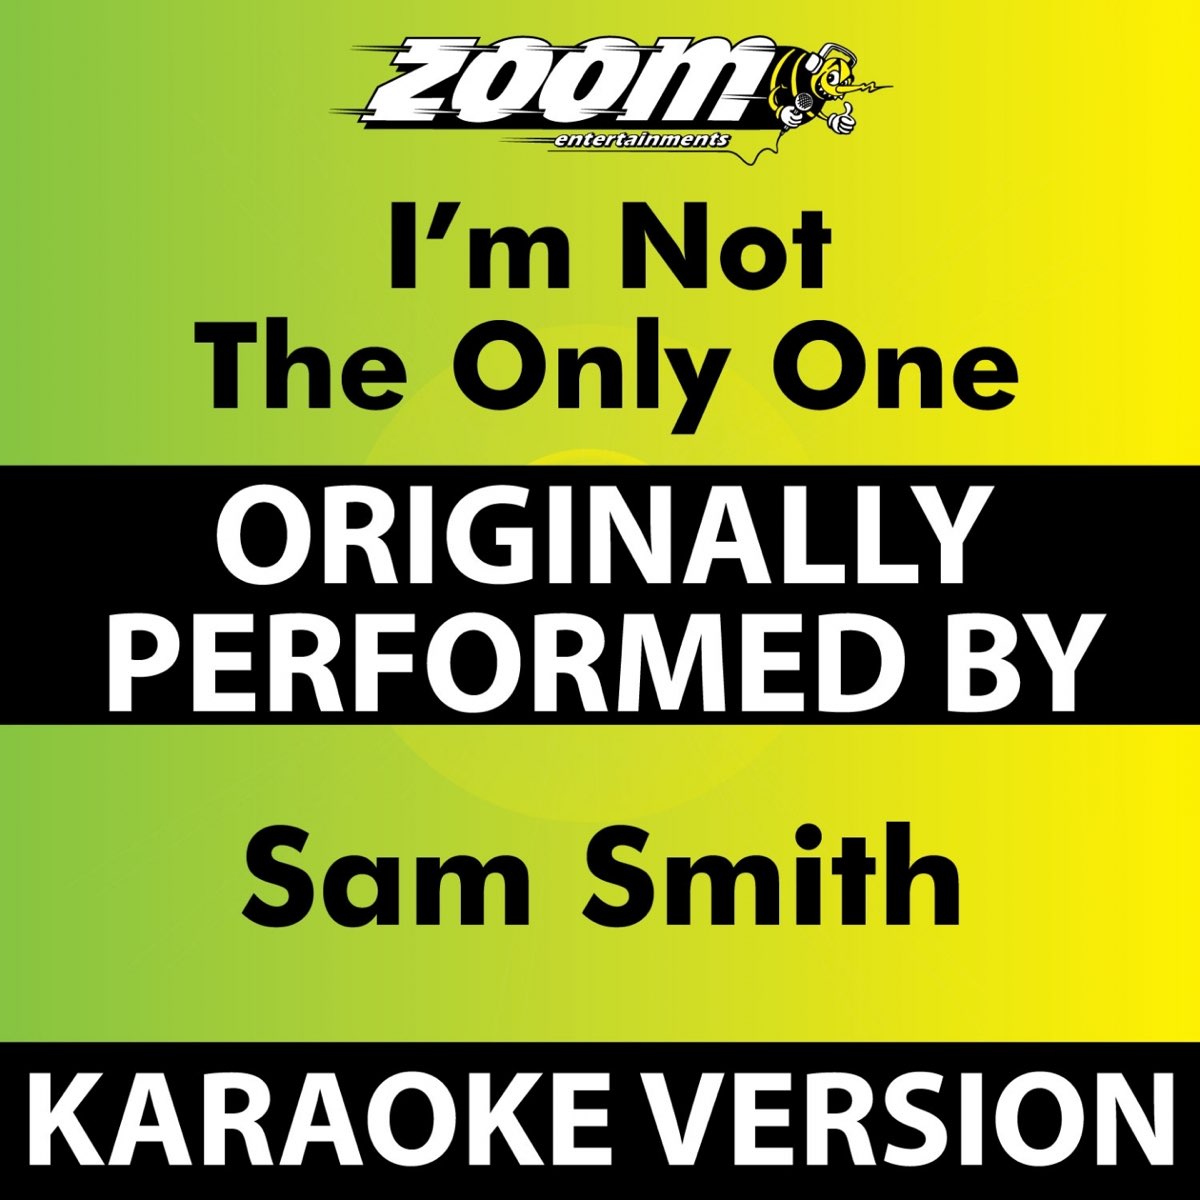 I'm Not the Only One (Karaoke Version) [Originally Performed By Sam Smith]  - Single by Zoom Karaoke on Apple Music